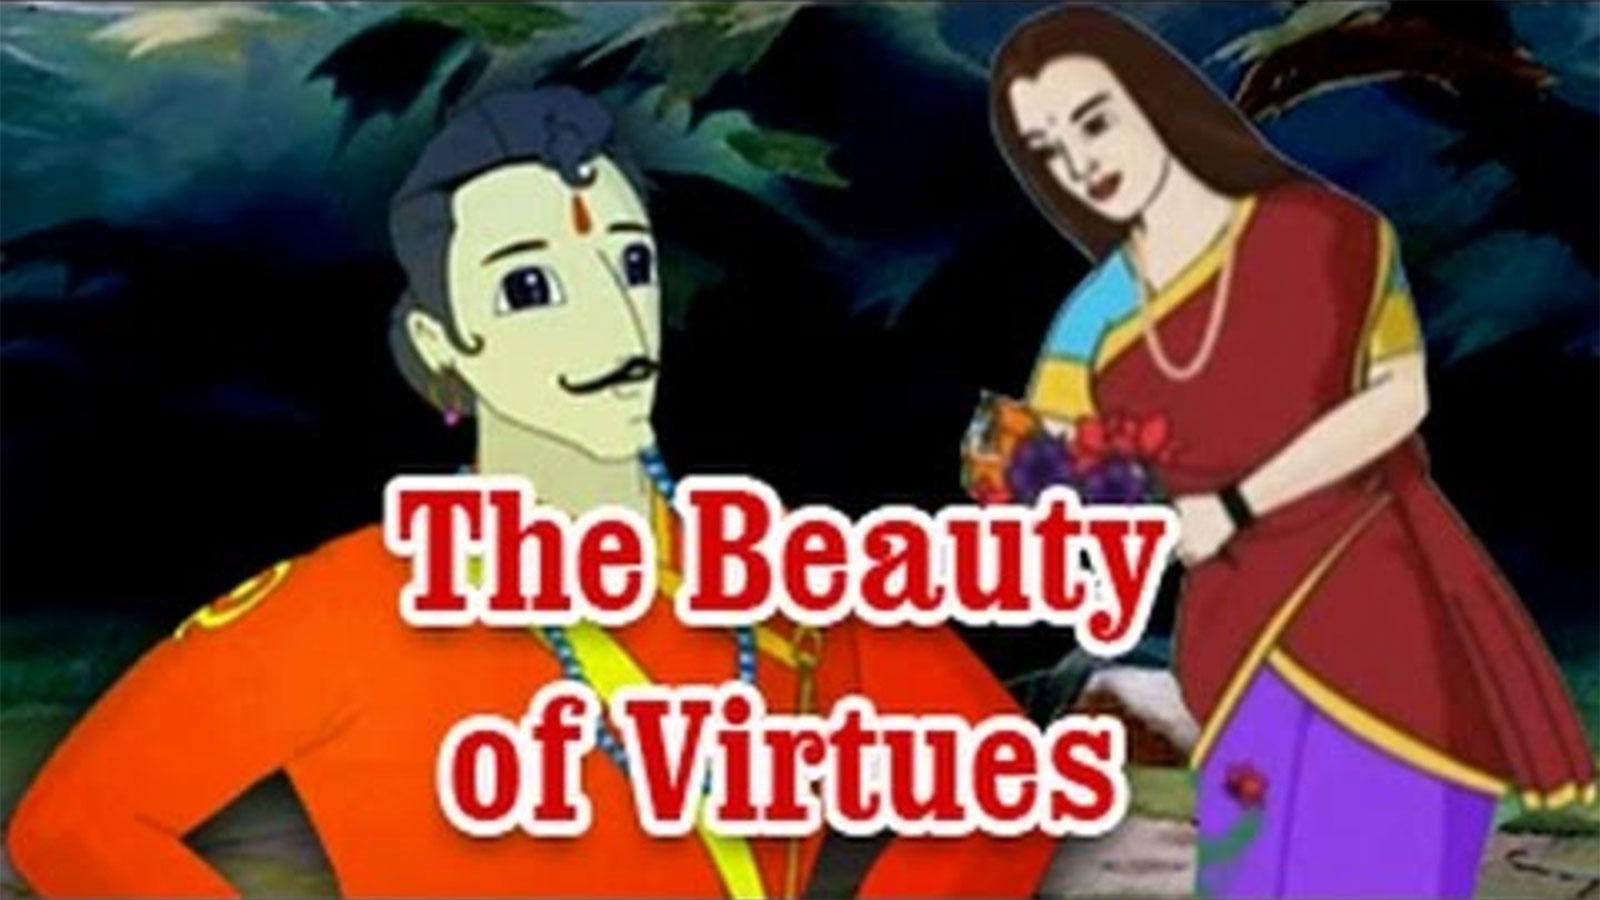 Check Out Popular Children English Nursery Story 'Vikram Betal - The Beauty  of Virtues' for Kids - Watch Children's Nursery Stories, Baby Songs, Fairy  Tales In English | Entertainment - Times of India Videos